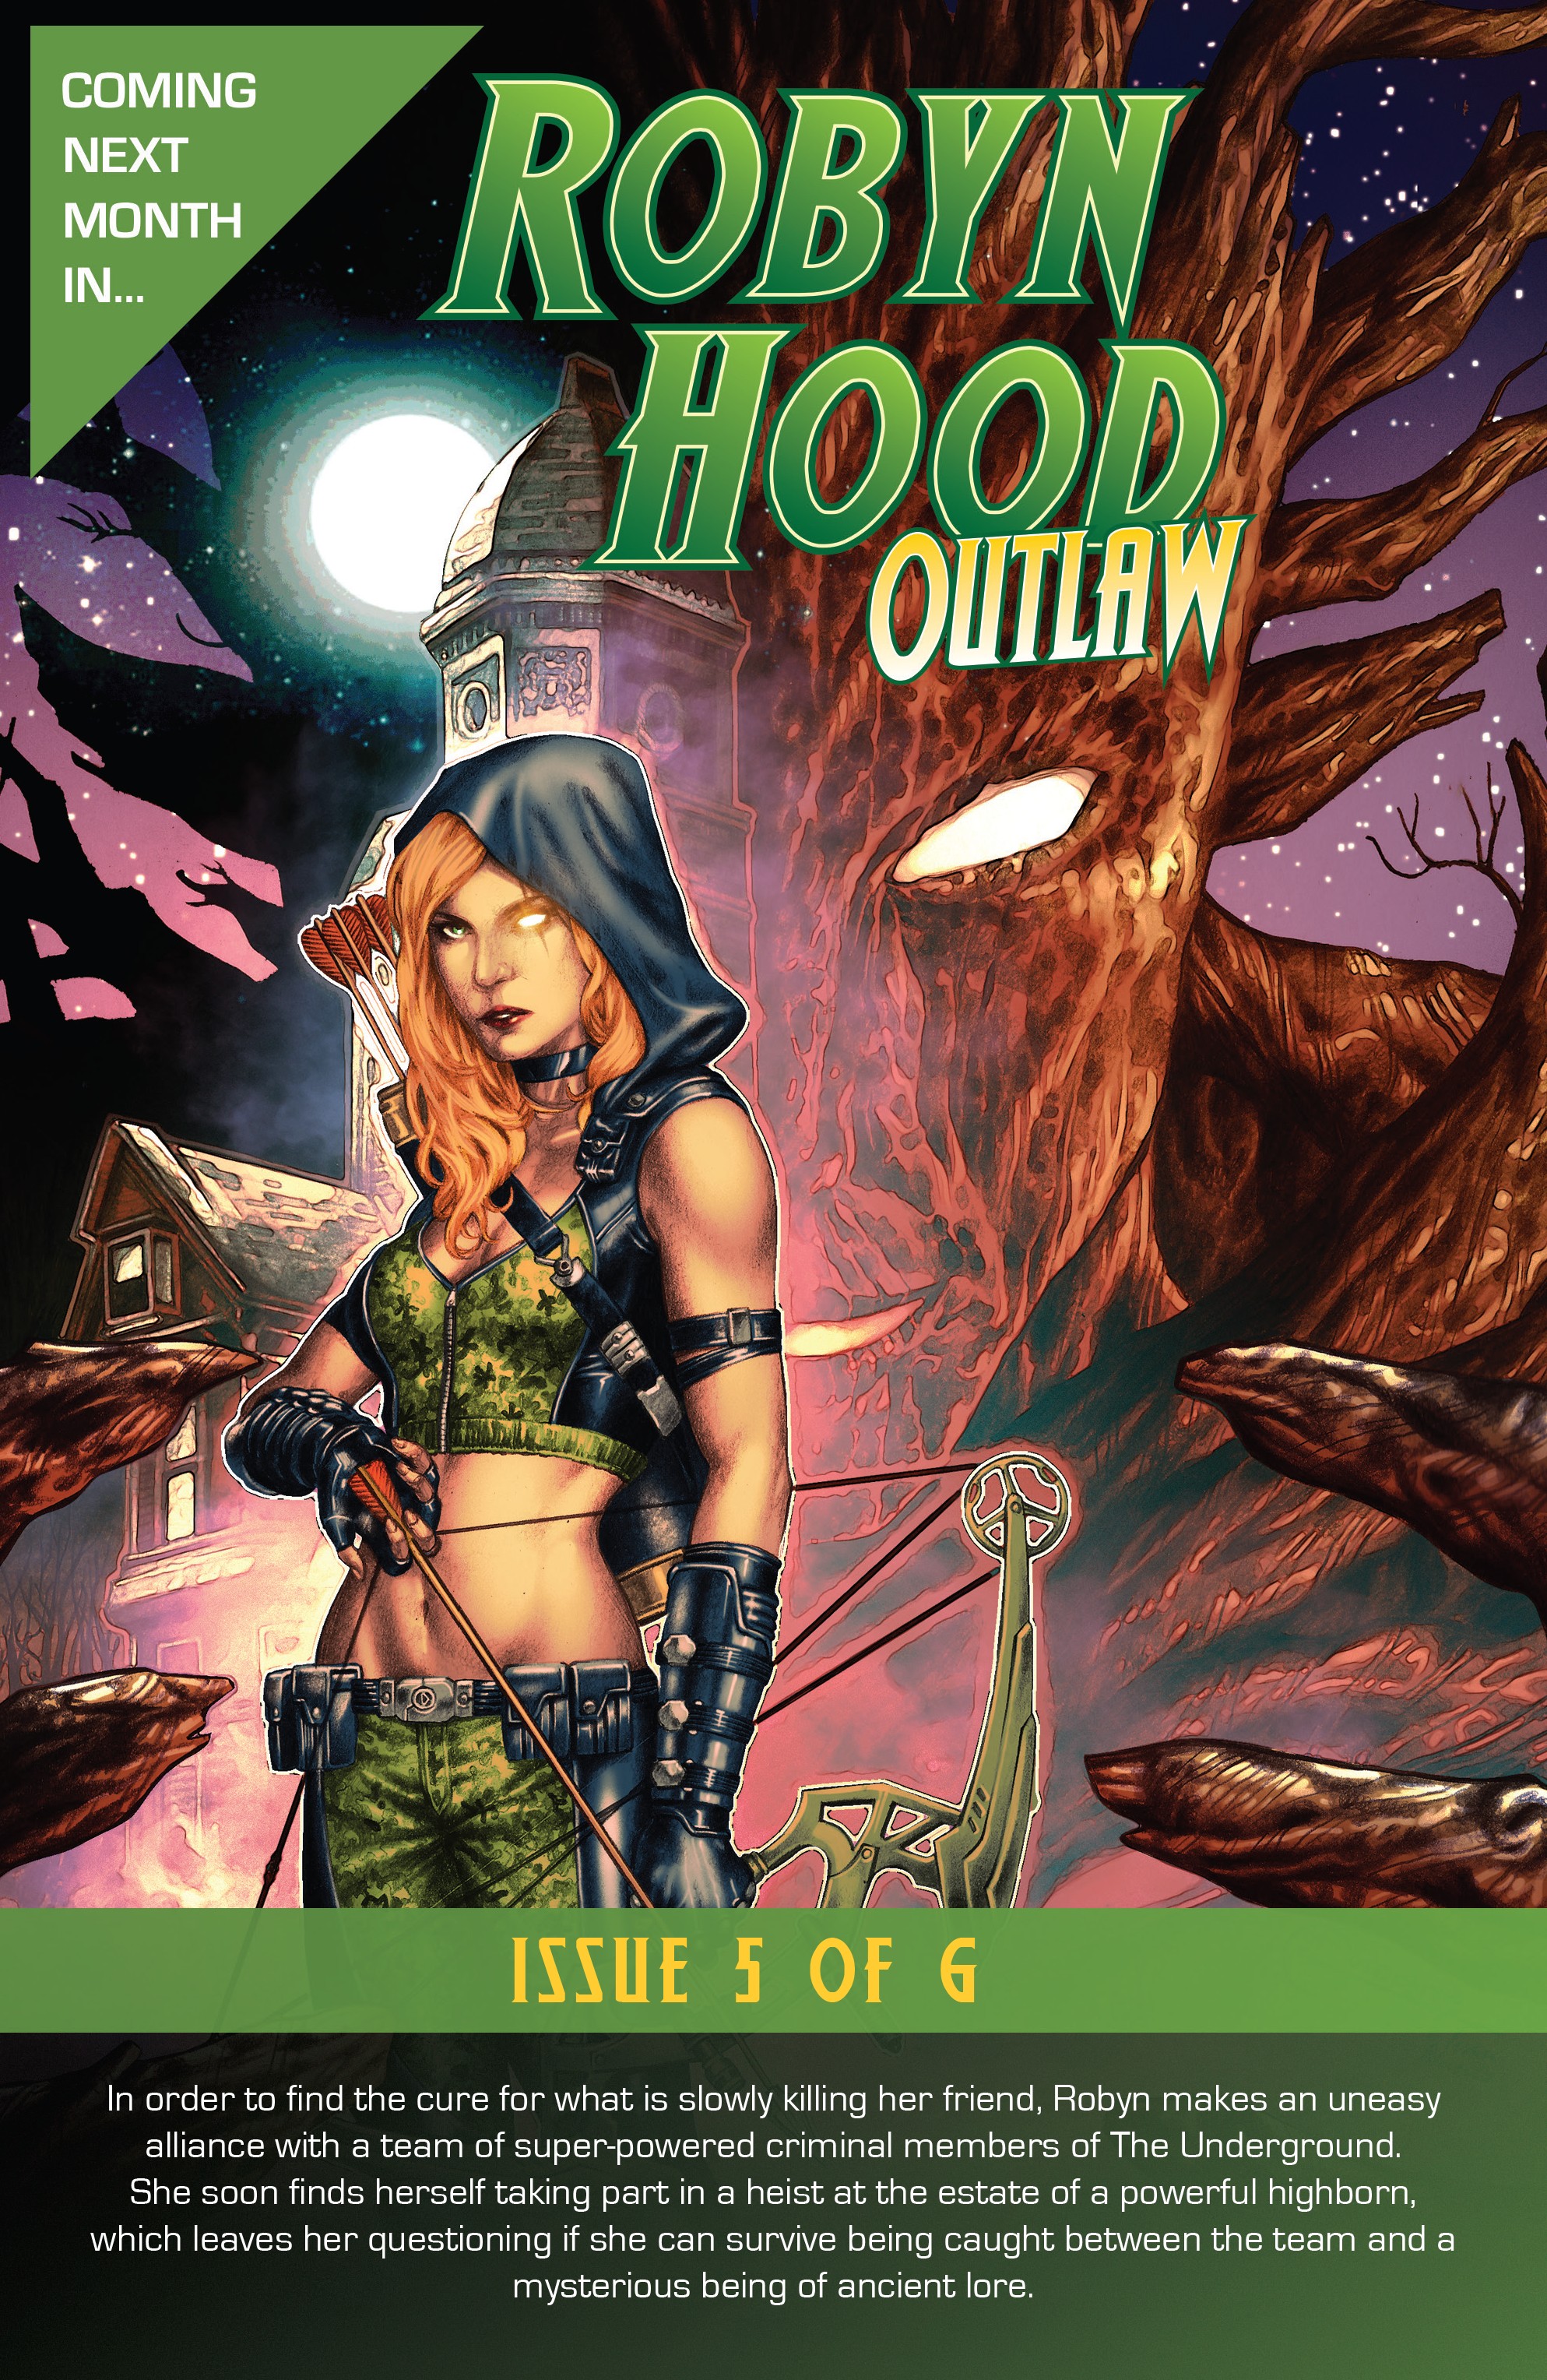 Robyn Hood Outlaw Trapped 004 024